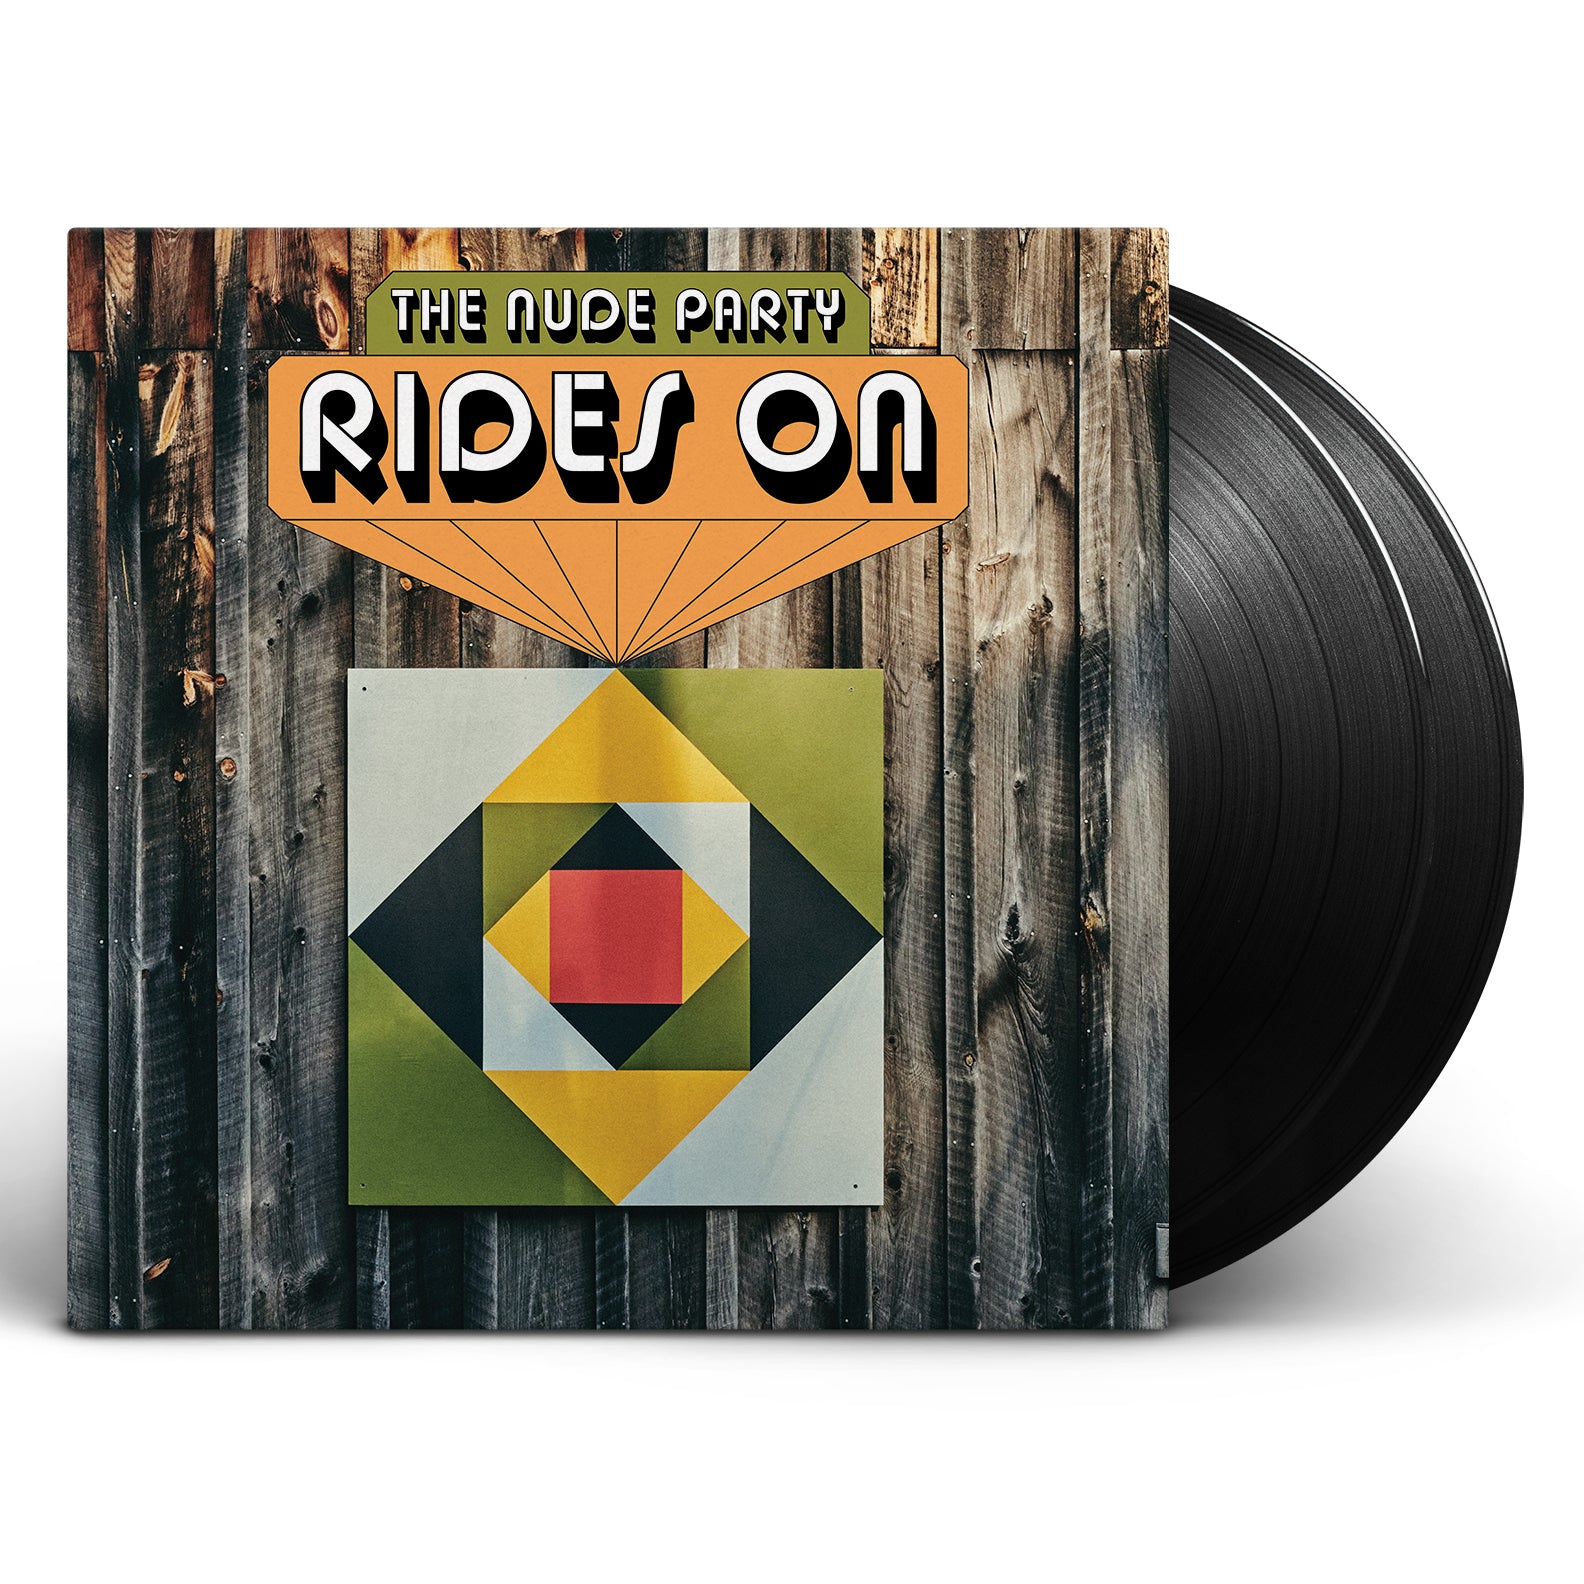 The Nude Party - Rides On [Vinyl]